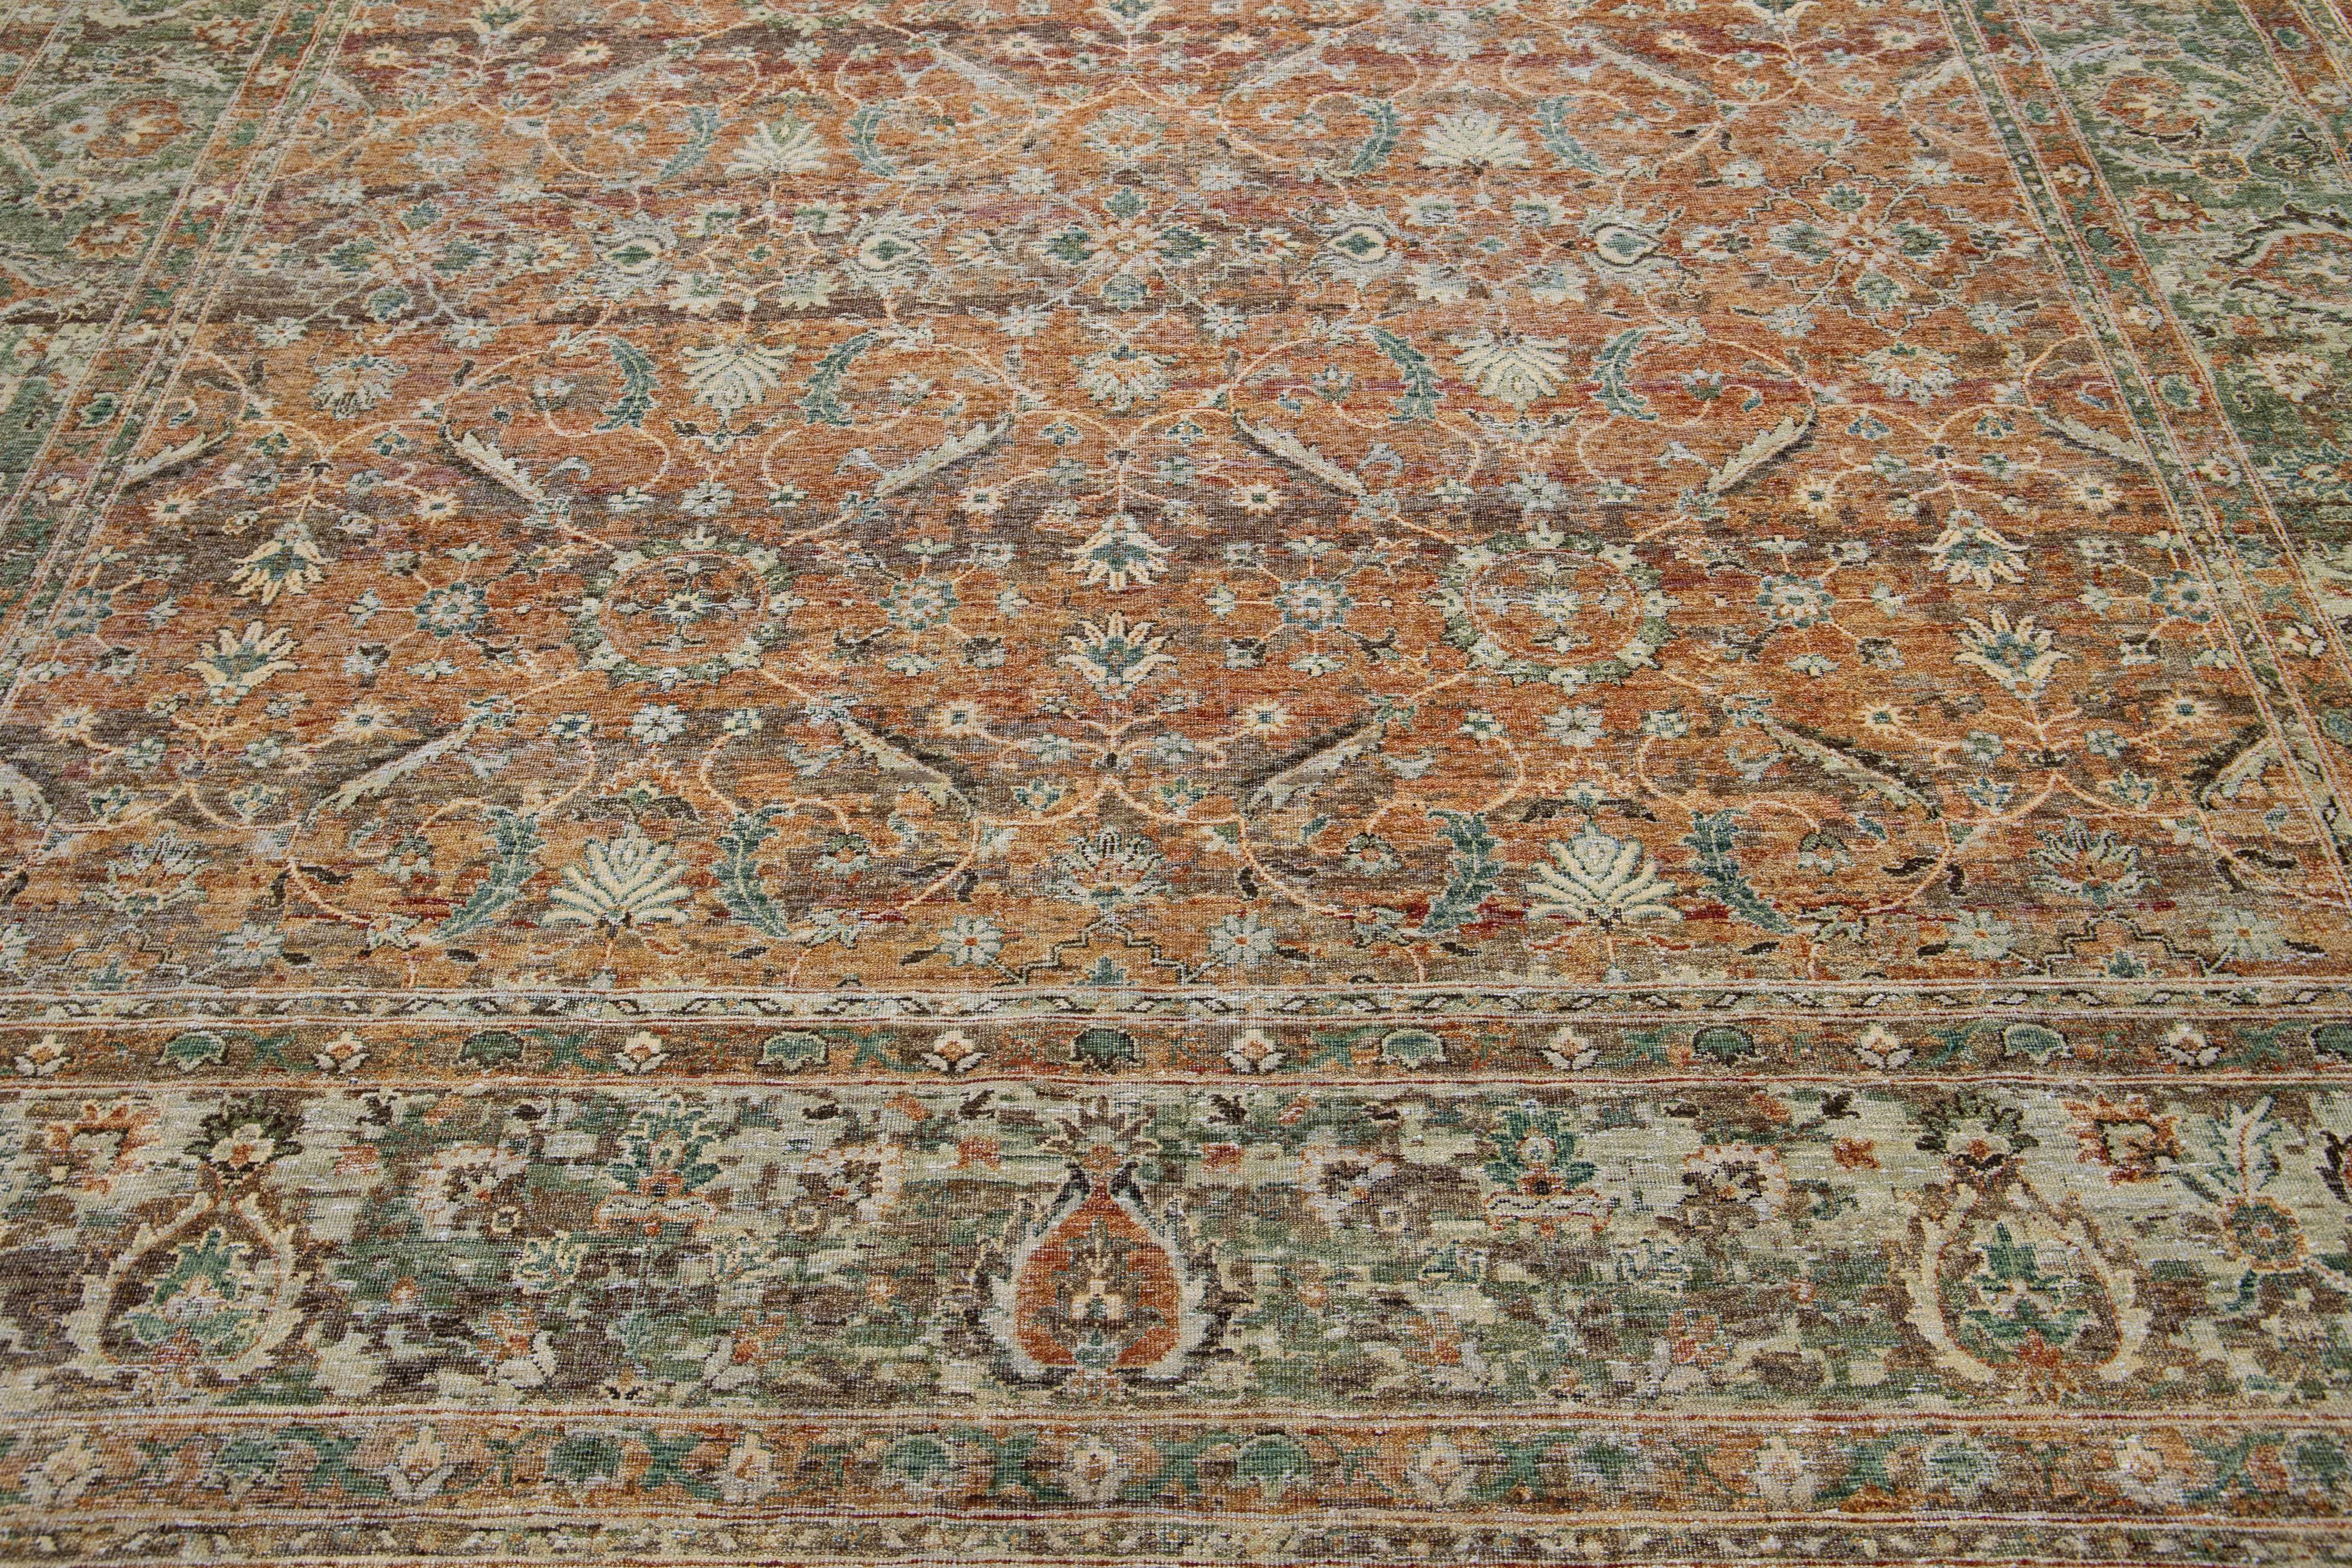 Apadana's Persian Tabriz Style Handmade Floral Wool Rug with Copper Field In New Condition For Sale In Norwalk, CT